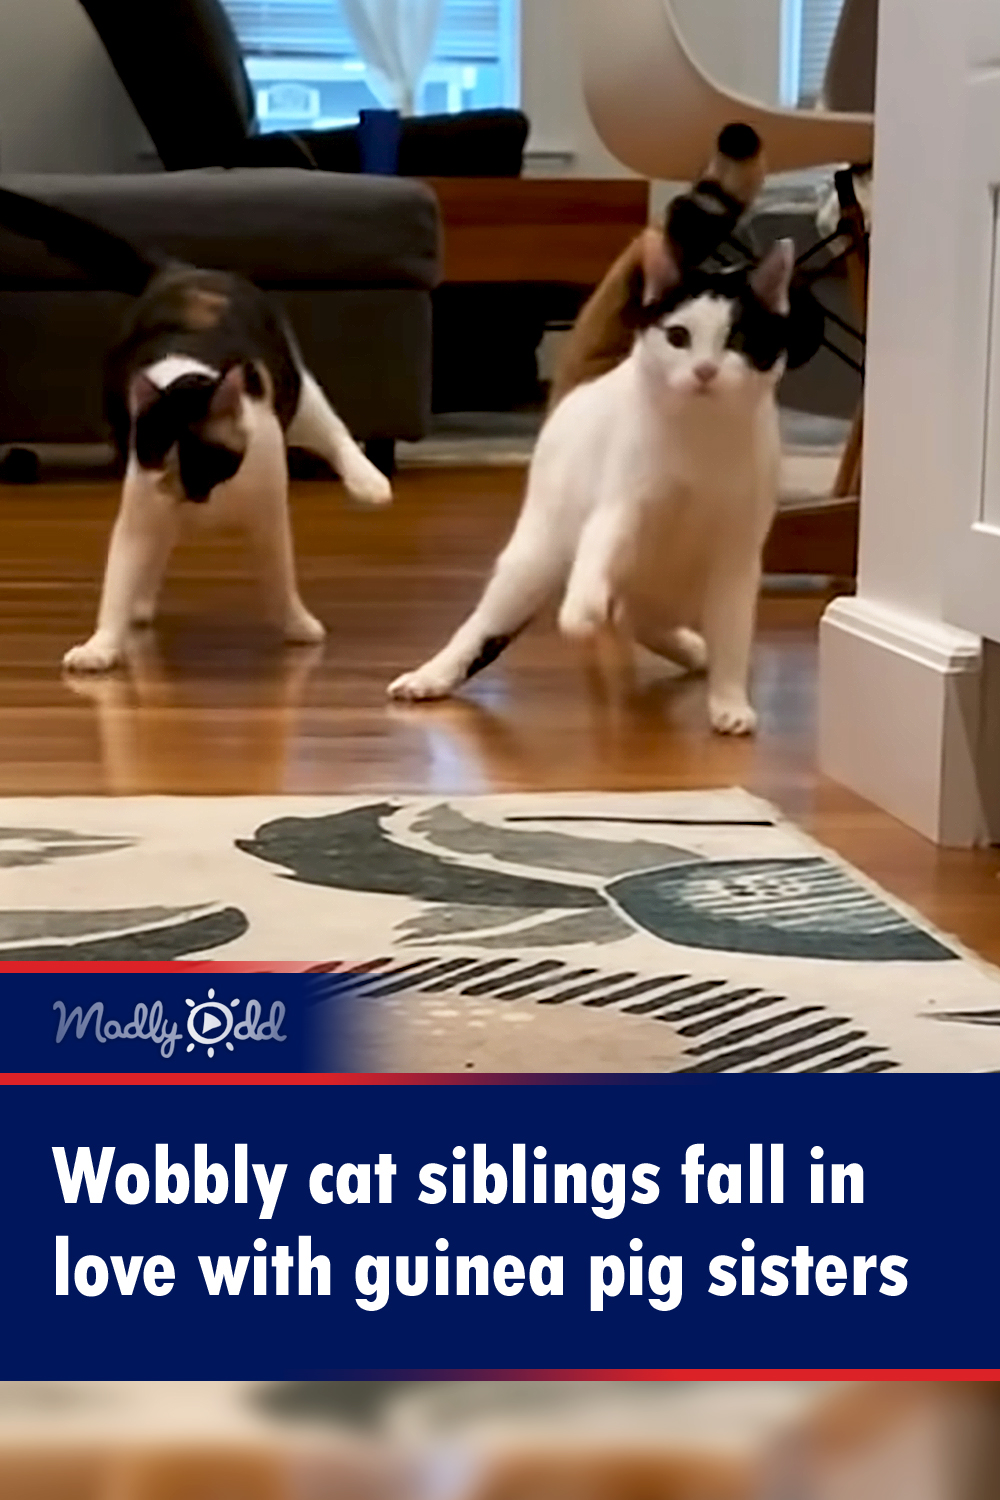 Wobbly cat siblings fall in love with guinea pig sisters